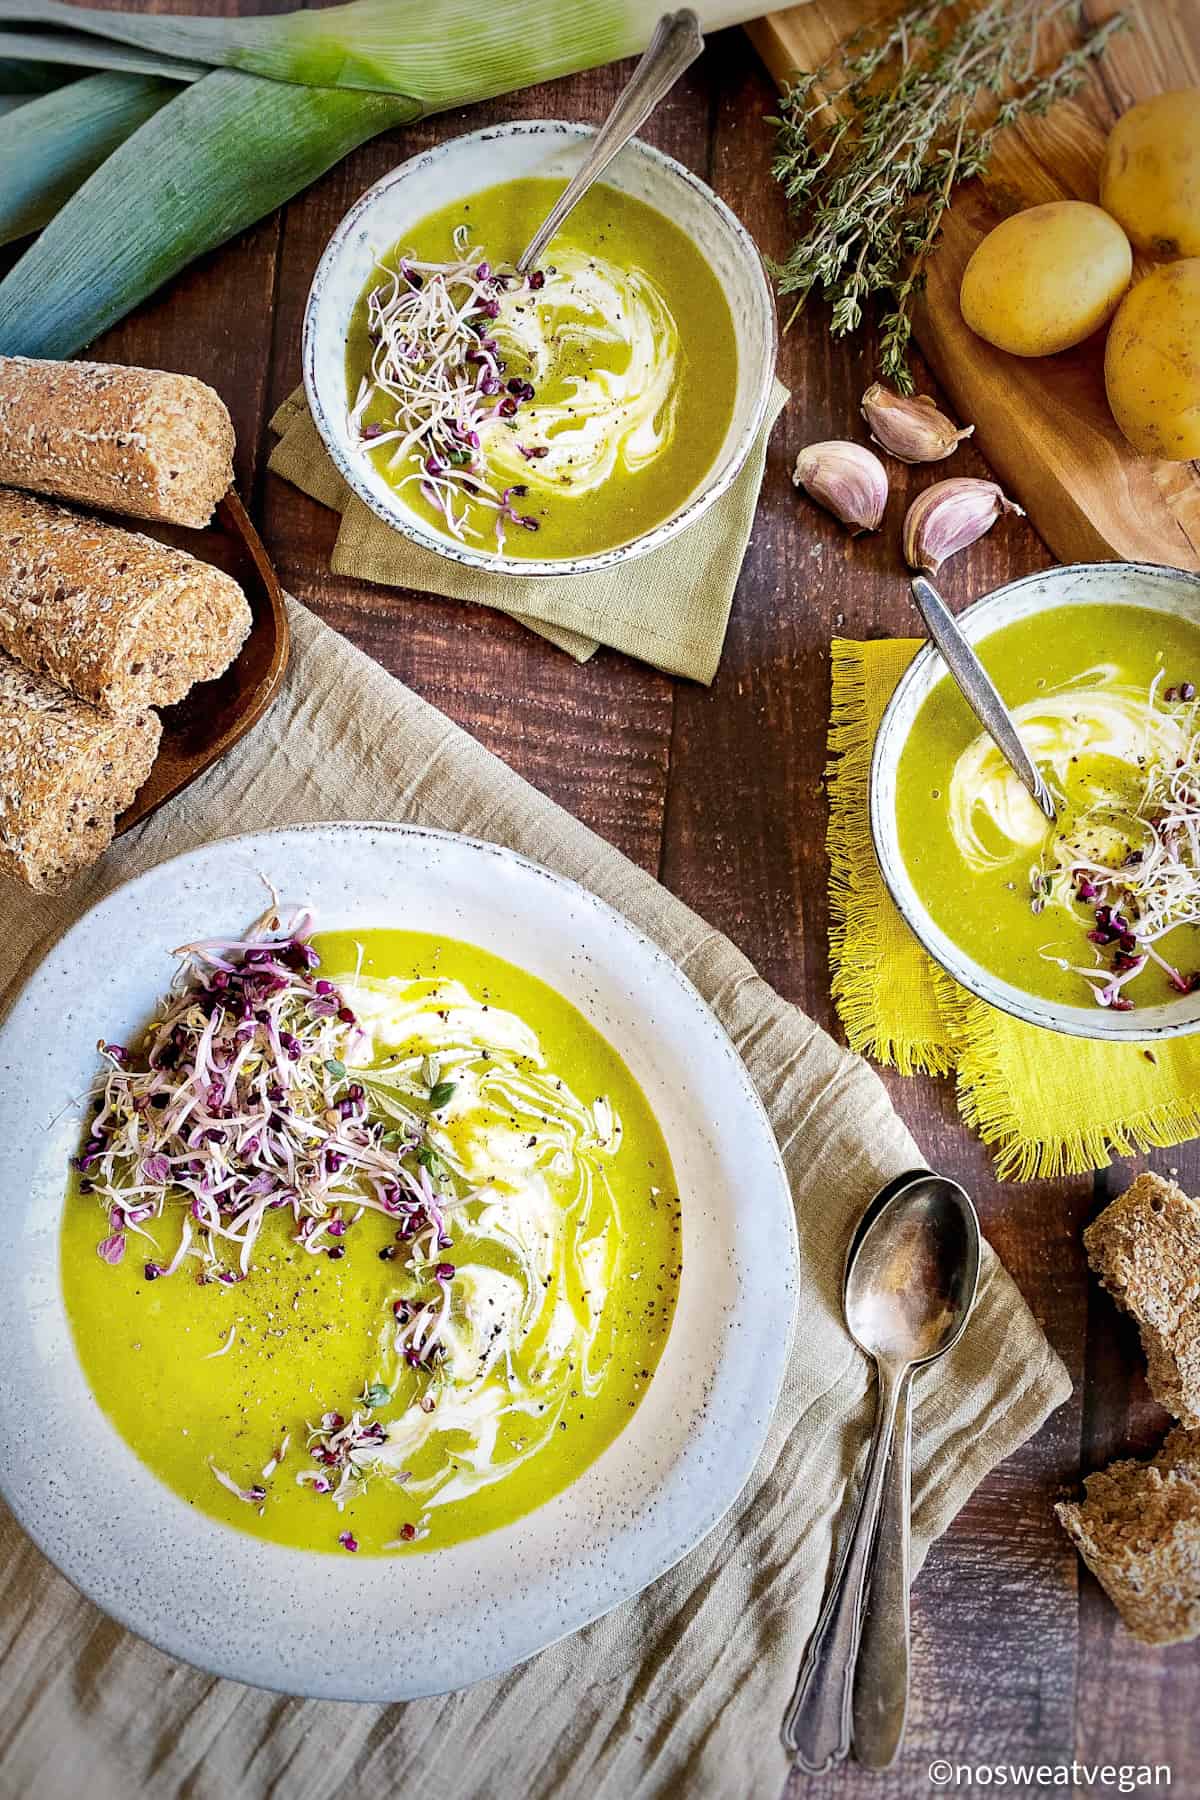 Leek and potato soup in bowls with herbs and bread.